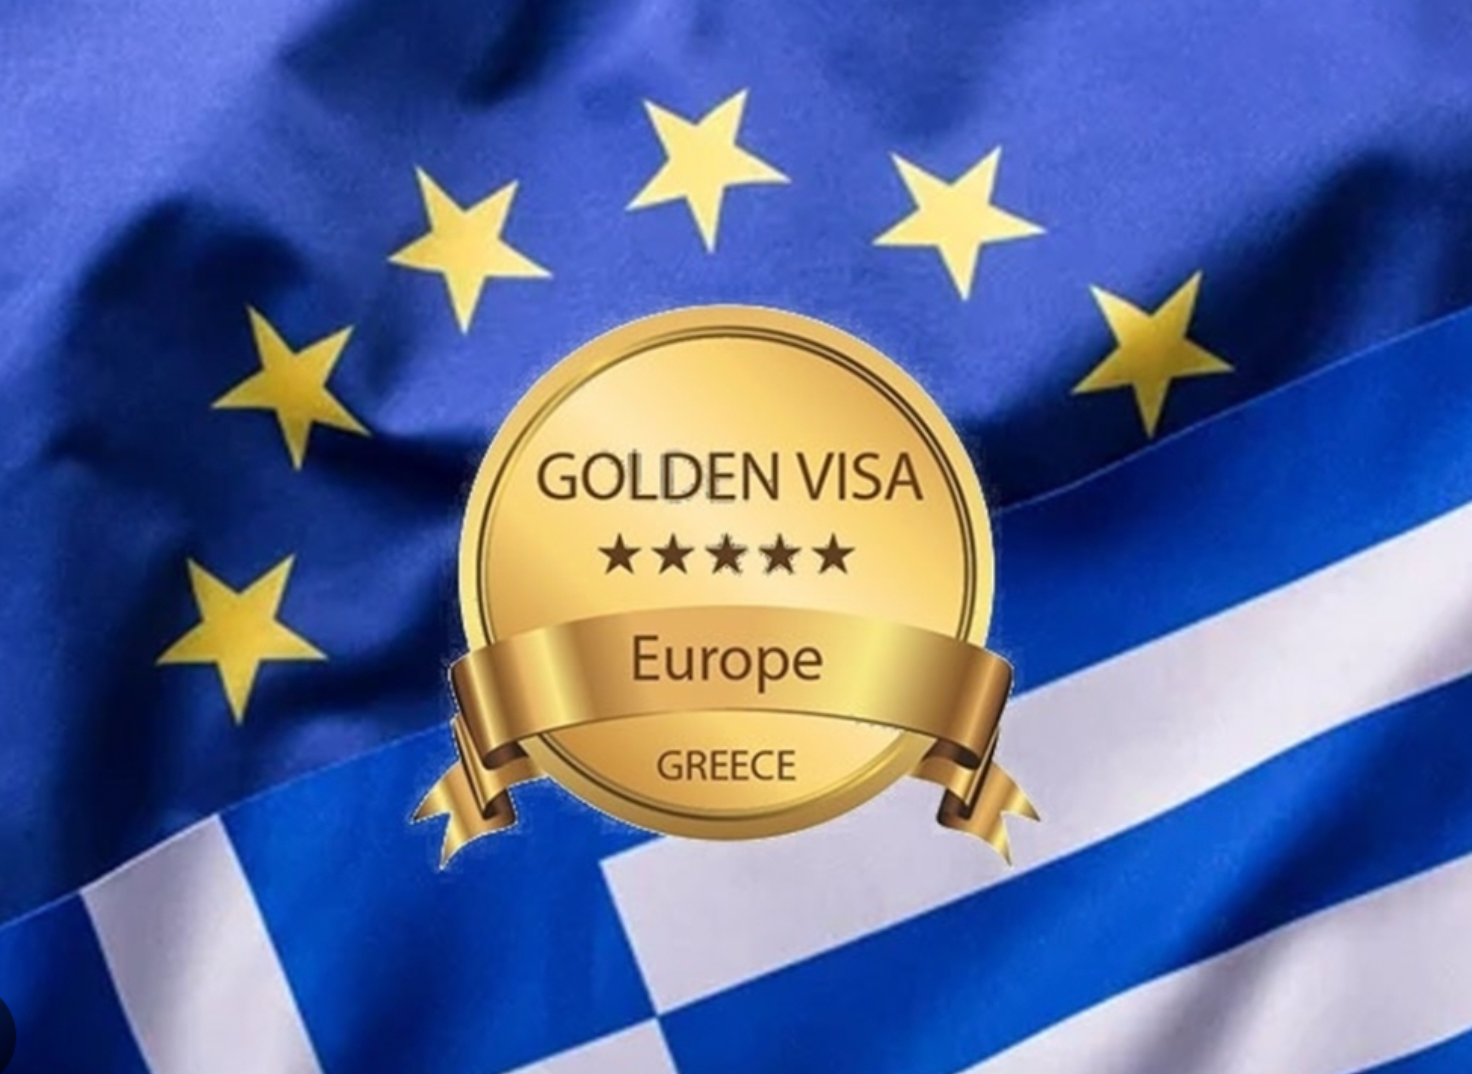 New Greek Golden Visa rules: Minimum purchase price going up to €400,000 - €800,000 plus short-term 